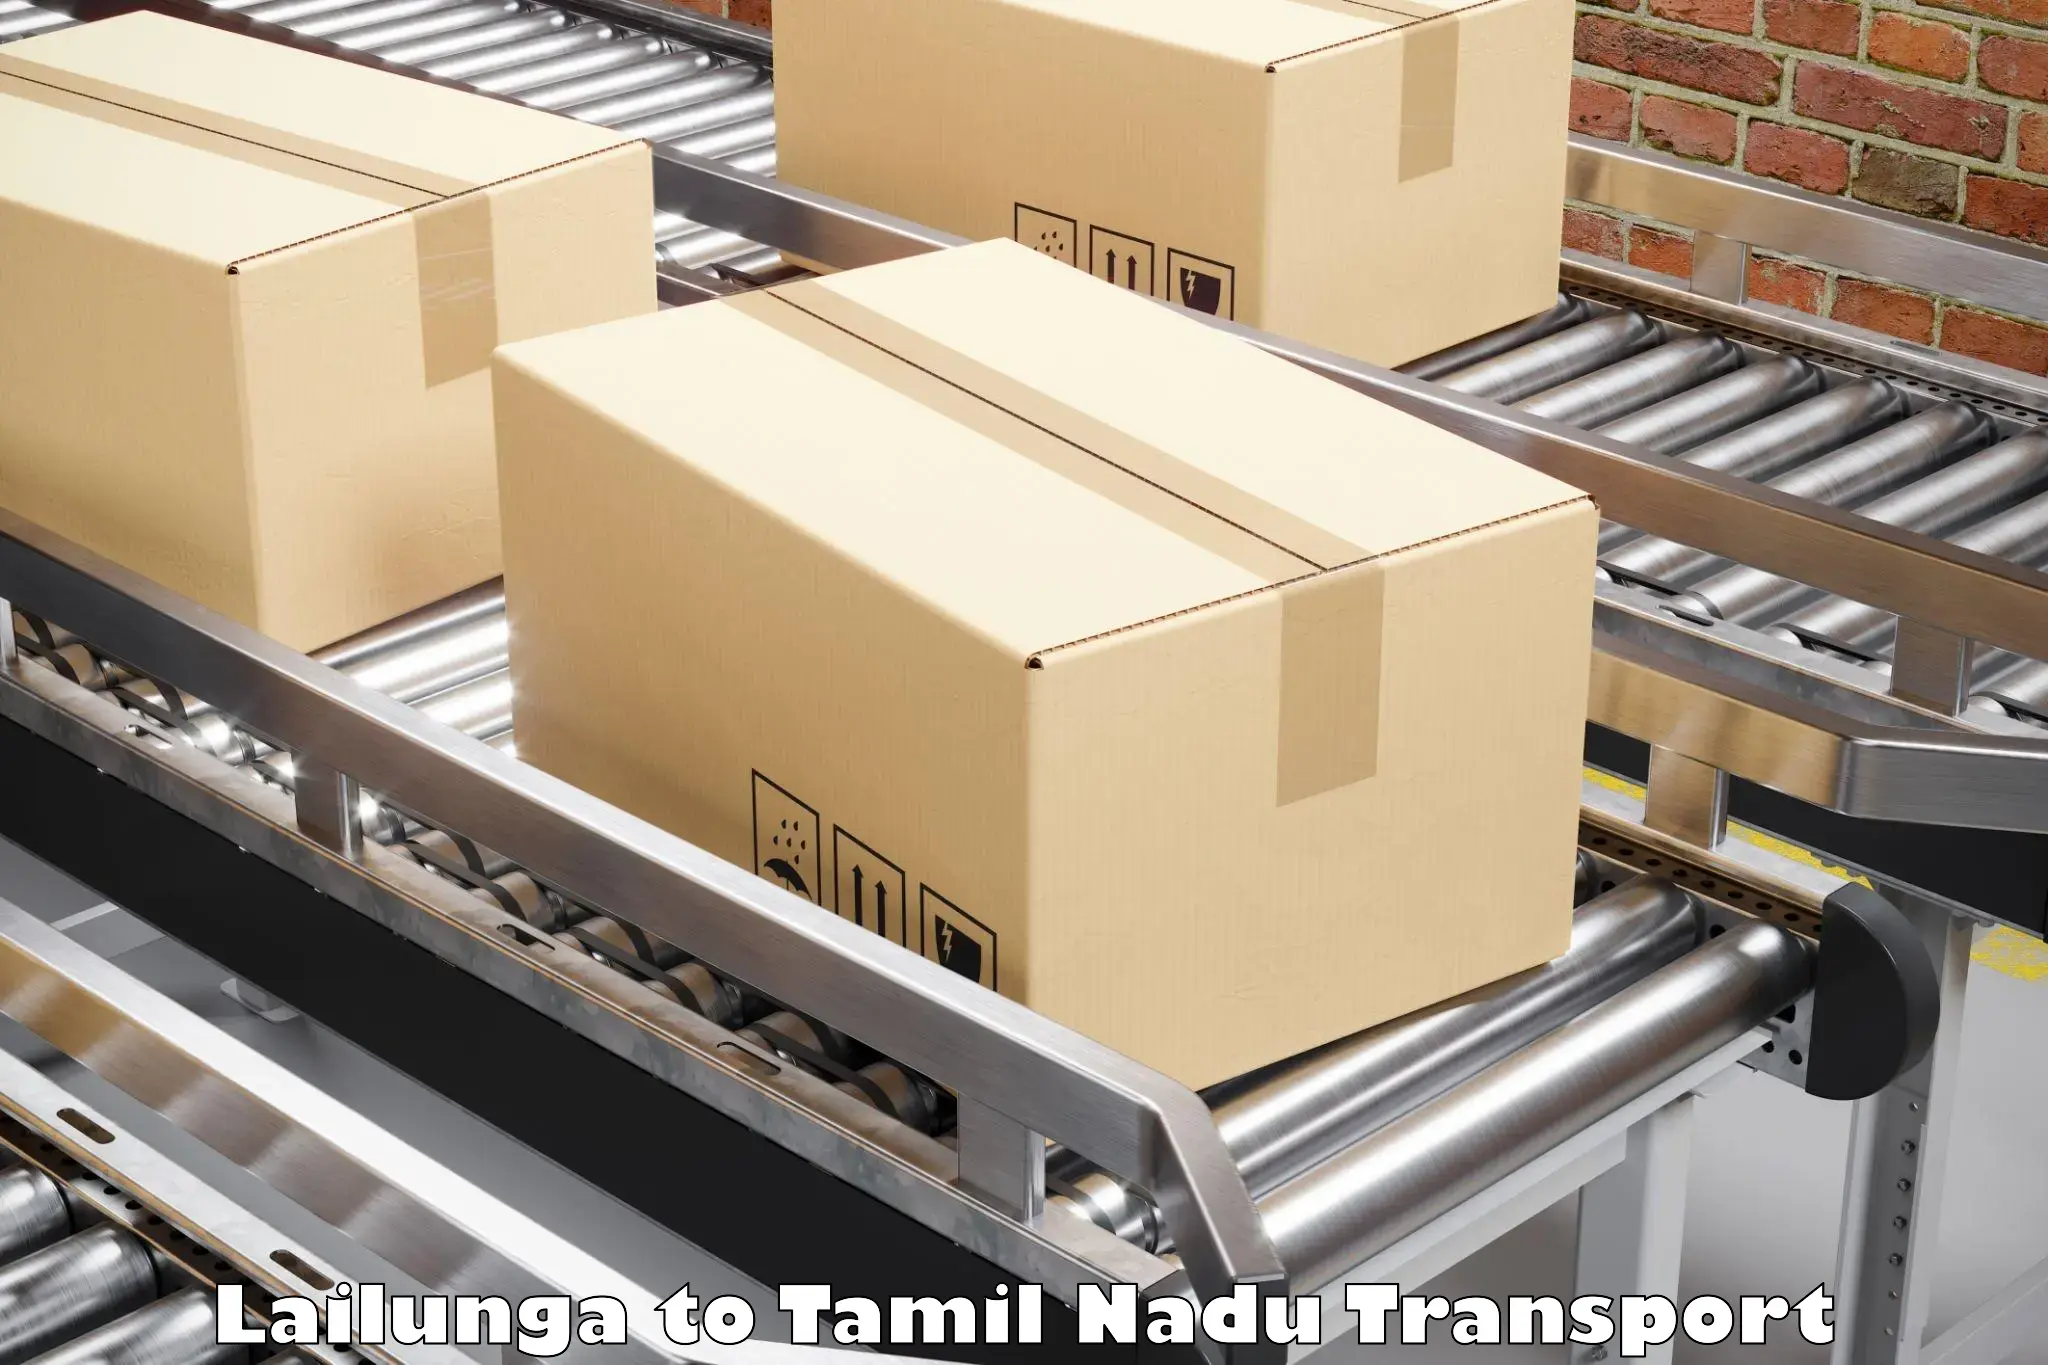 Domestic transport services Lailunga to Coimbatore